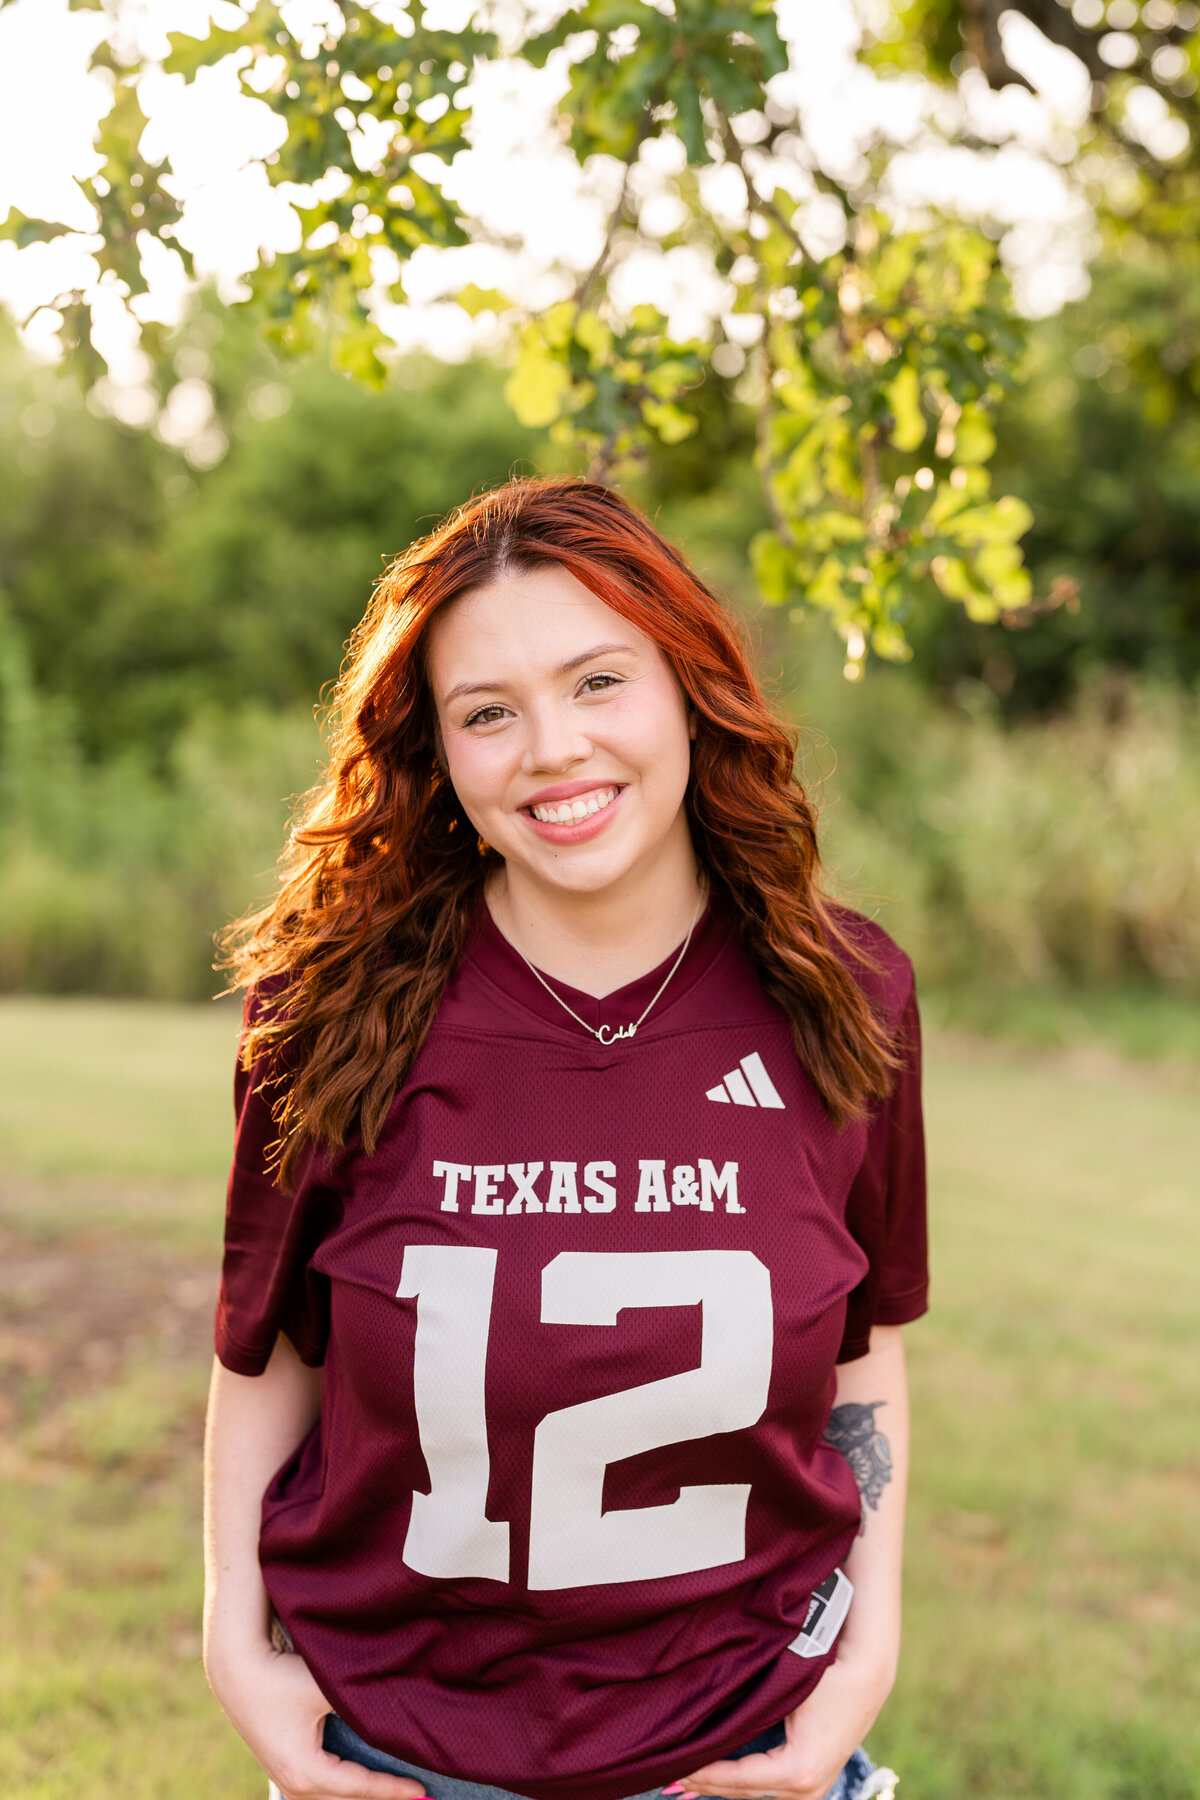 Texas A&M senior girl with hands in pockets and smiling while wearing Aggie maroon jersey and surrounded by nature at Leach Teaching Gardens